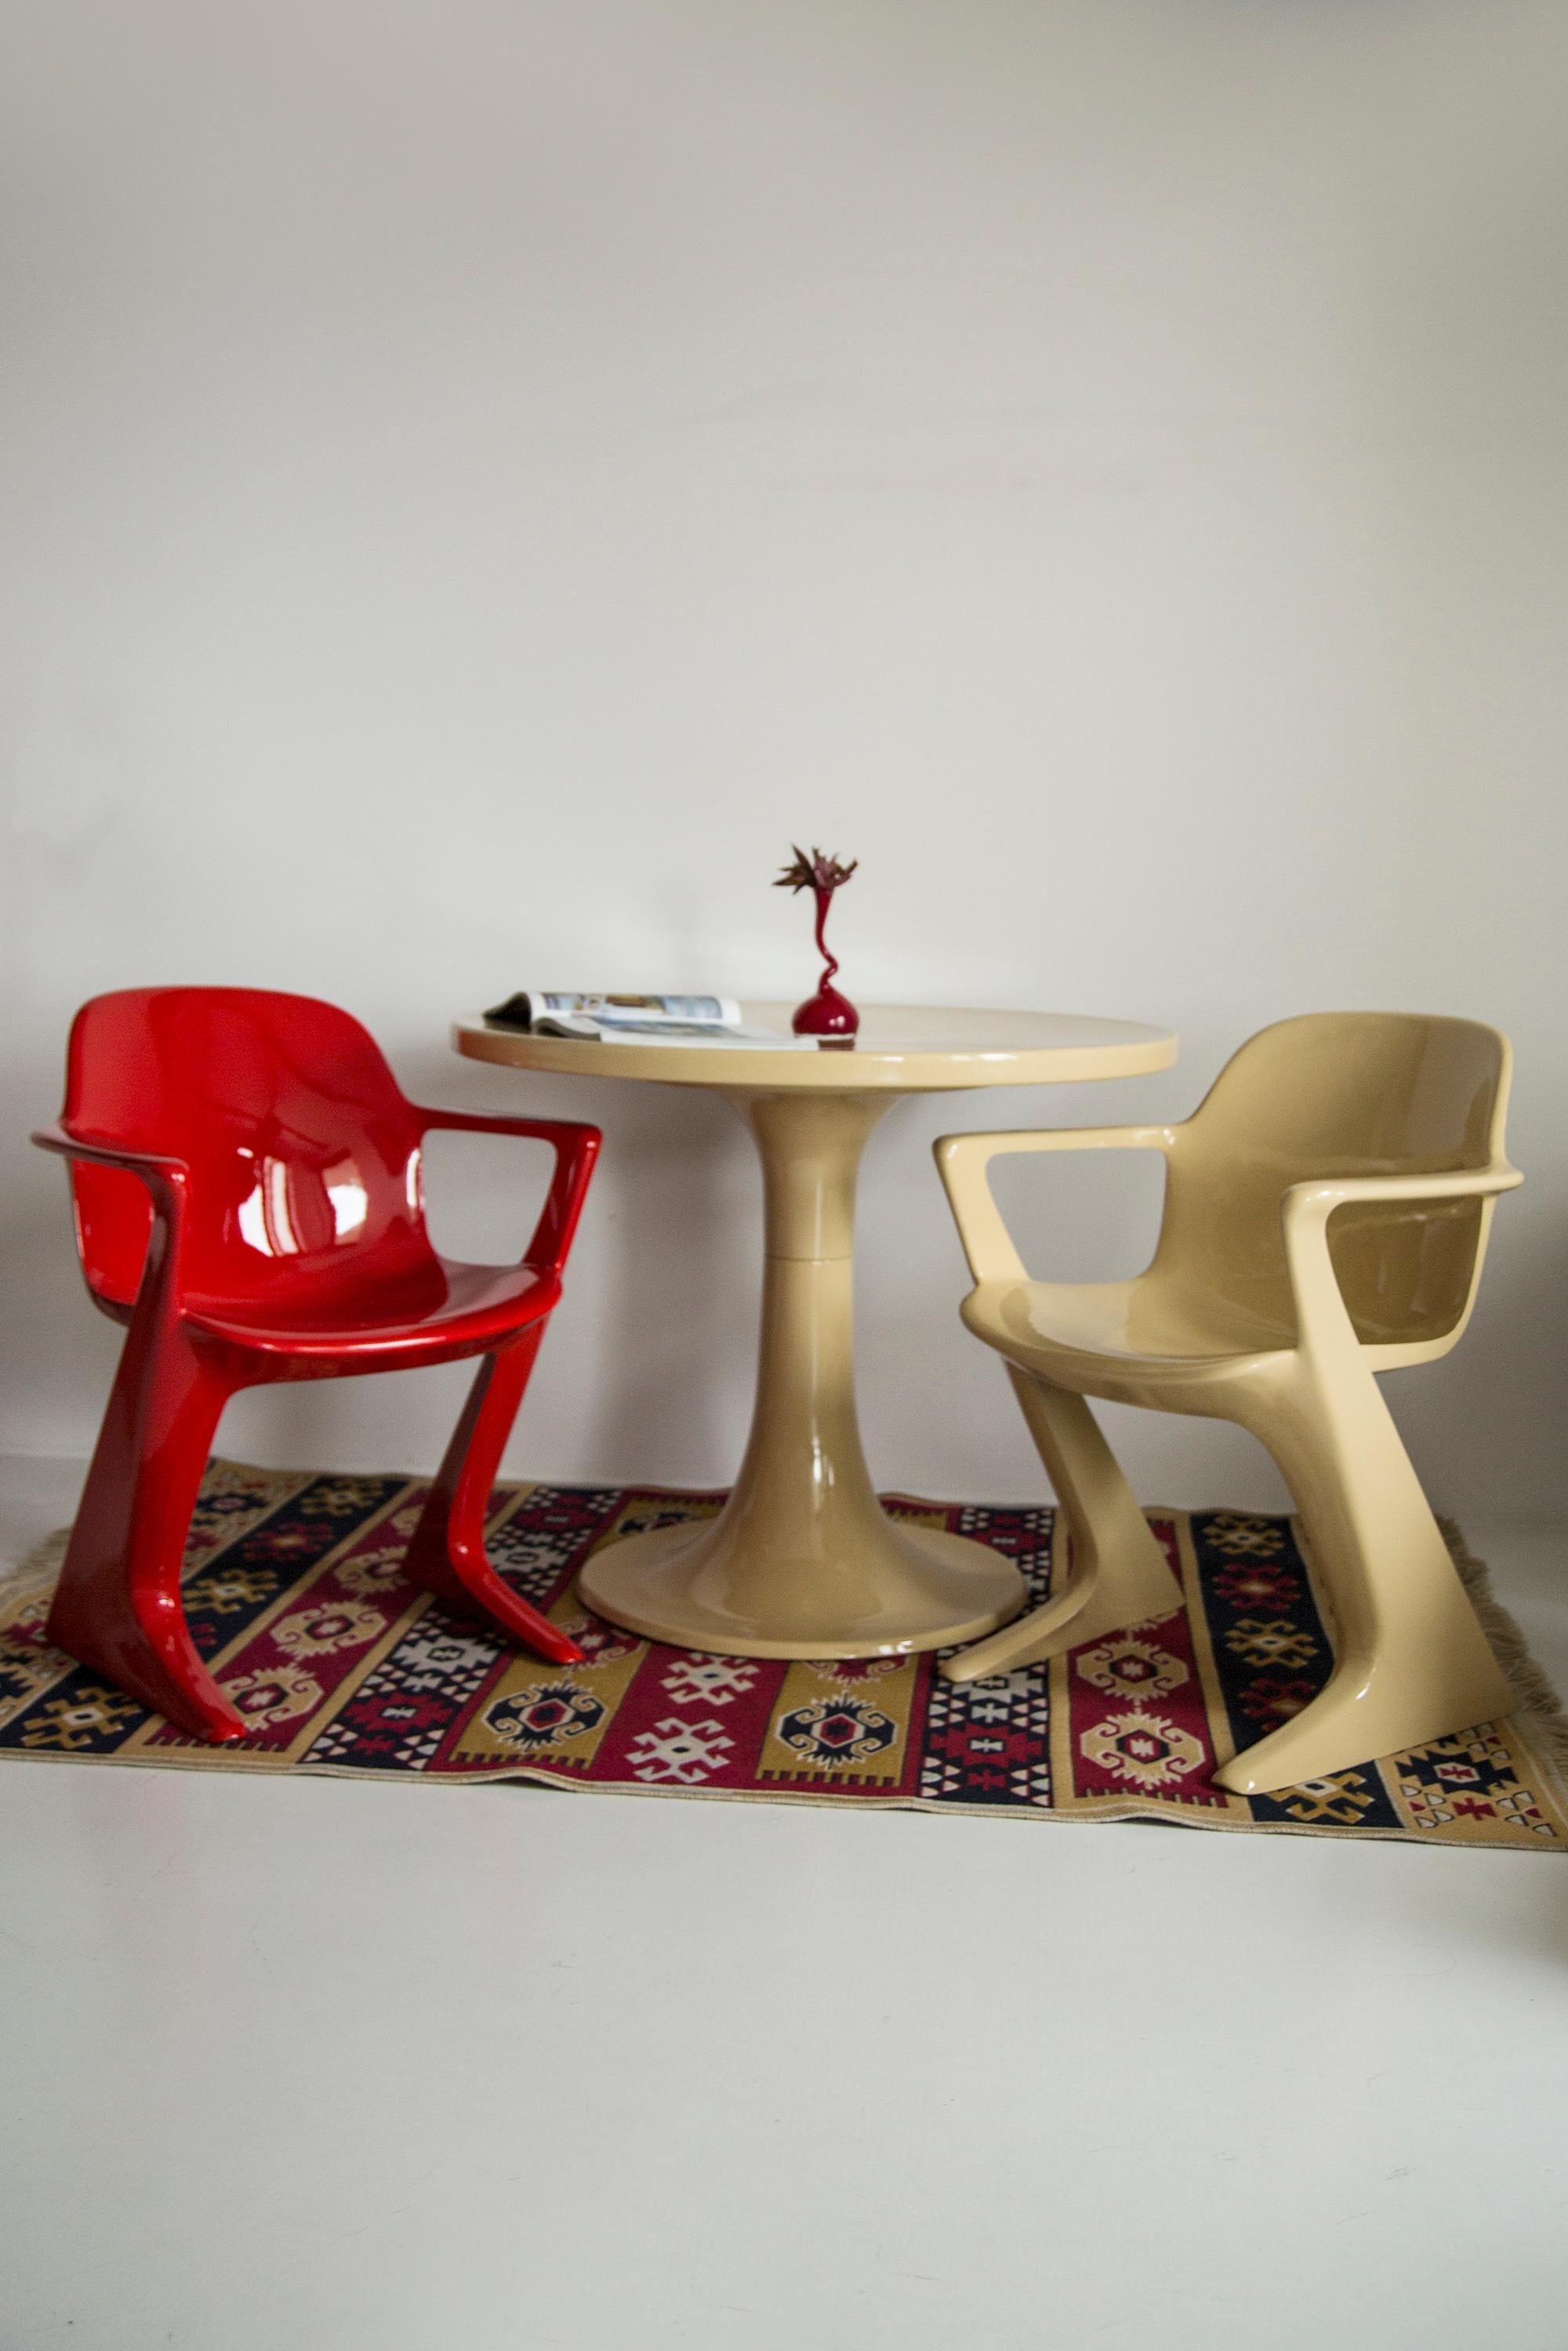 Midcentury Beige and Red Kangaroo Chairs and Table Ernst Moeckl, Germany, 1968 In Excellent Condition For Sale In 05-080 Hornowek, PL